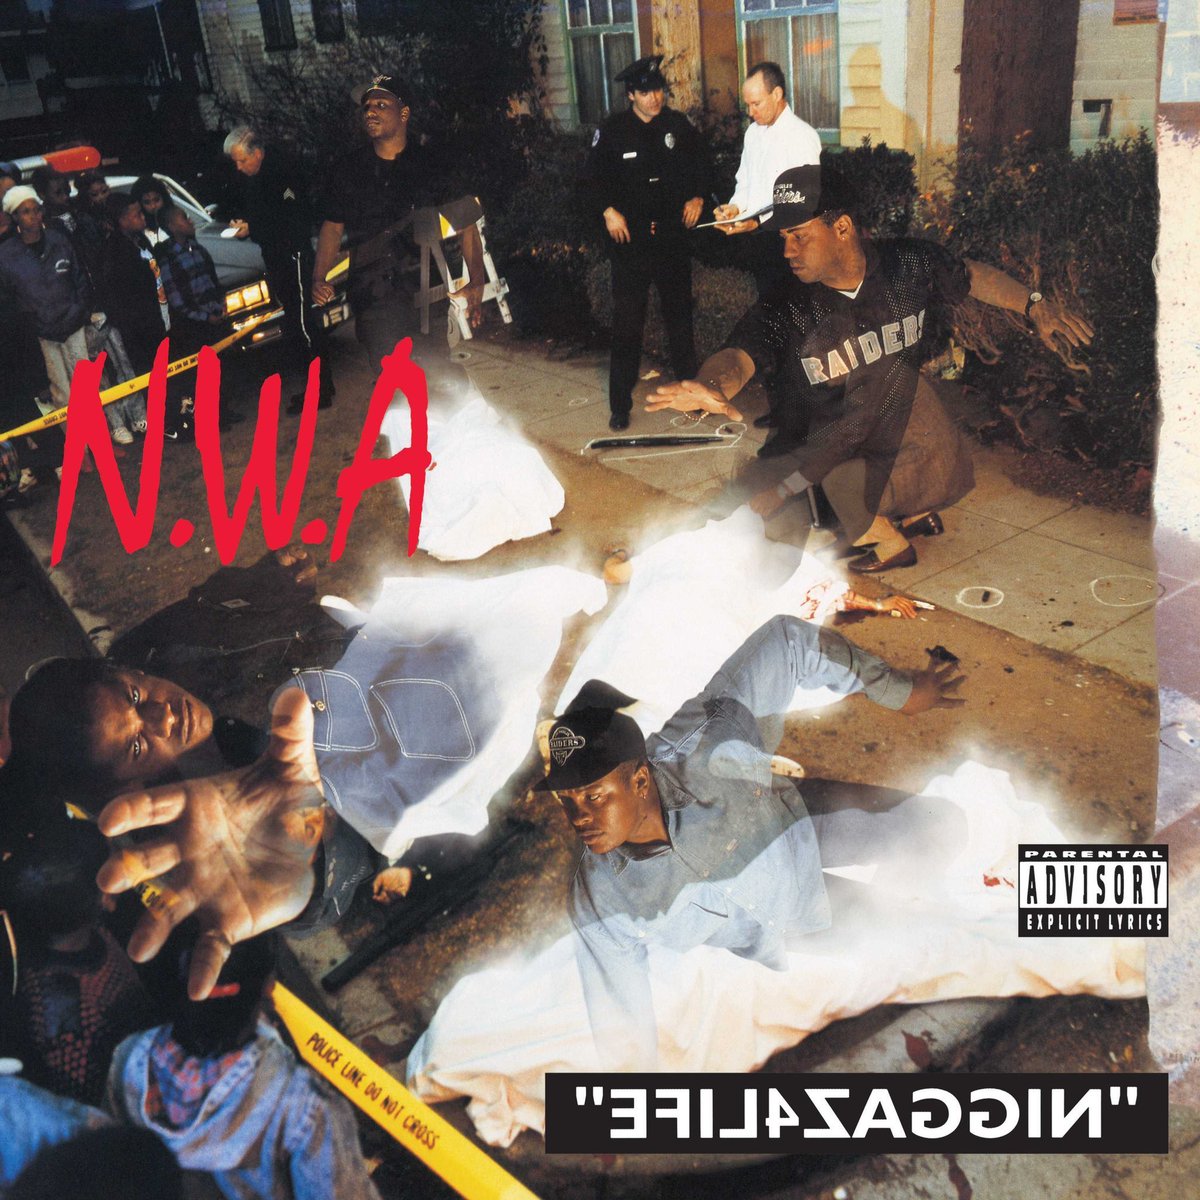 May 28, 1991 NWA released there 2nd and final album.